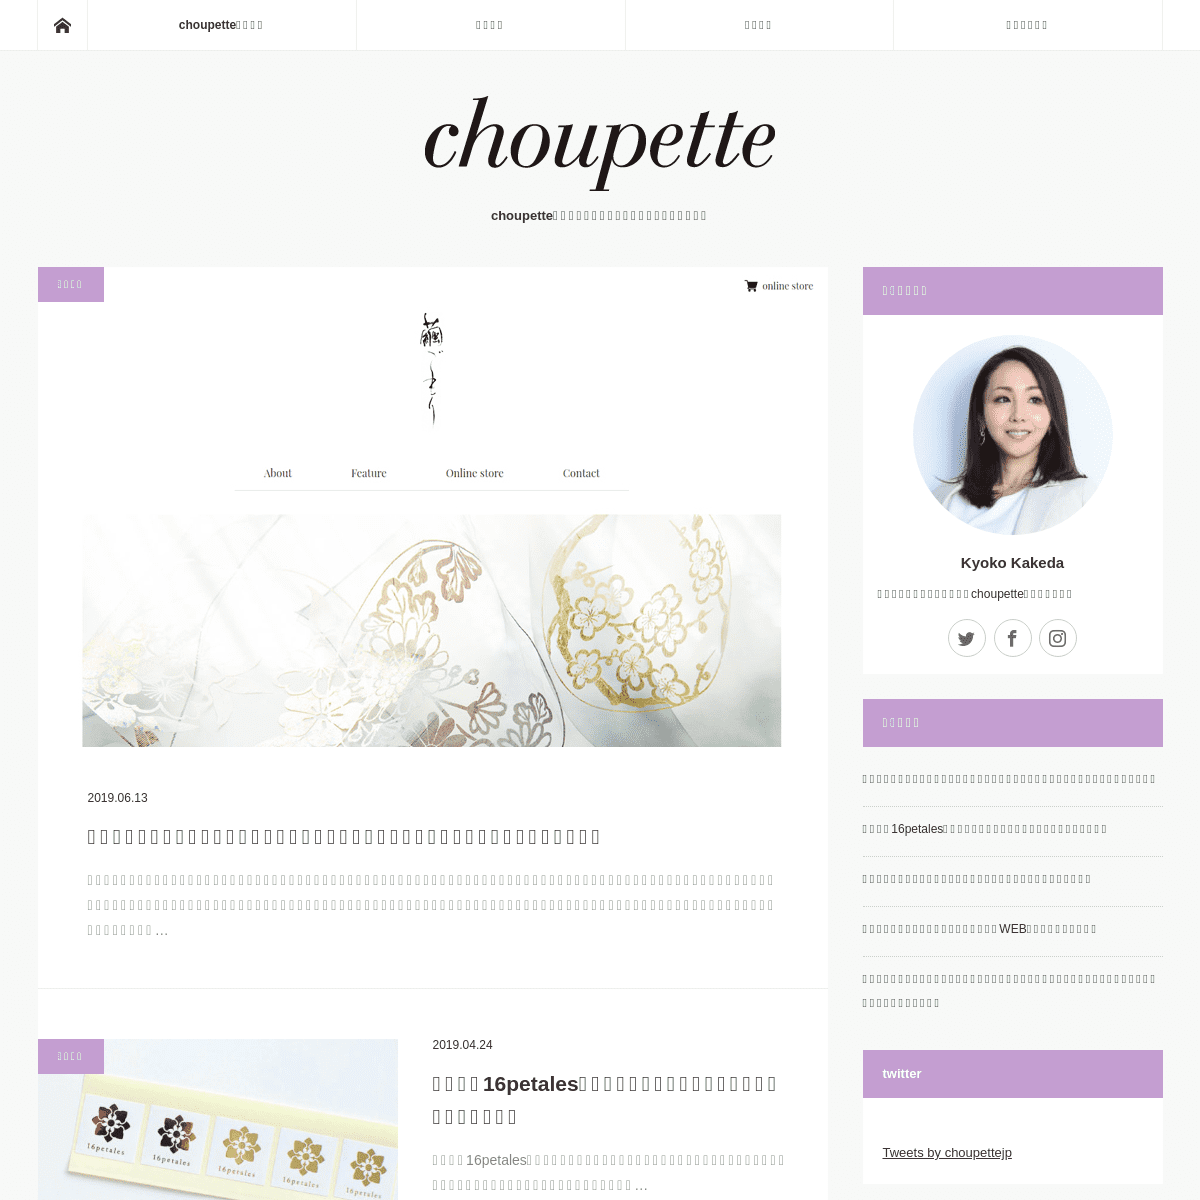 A complete backup of choupette.jp